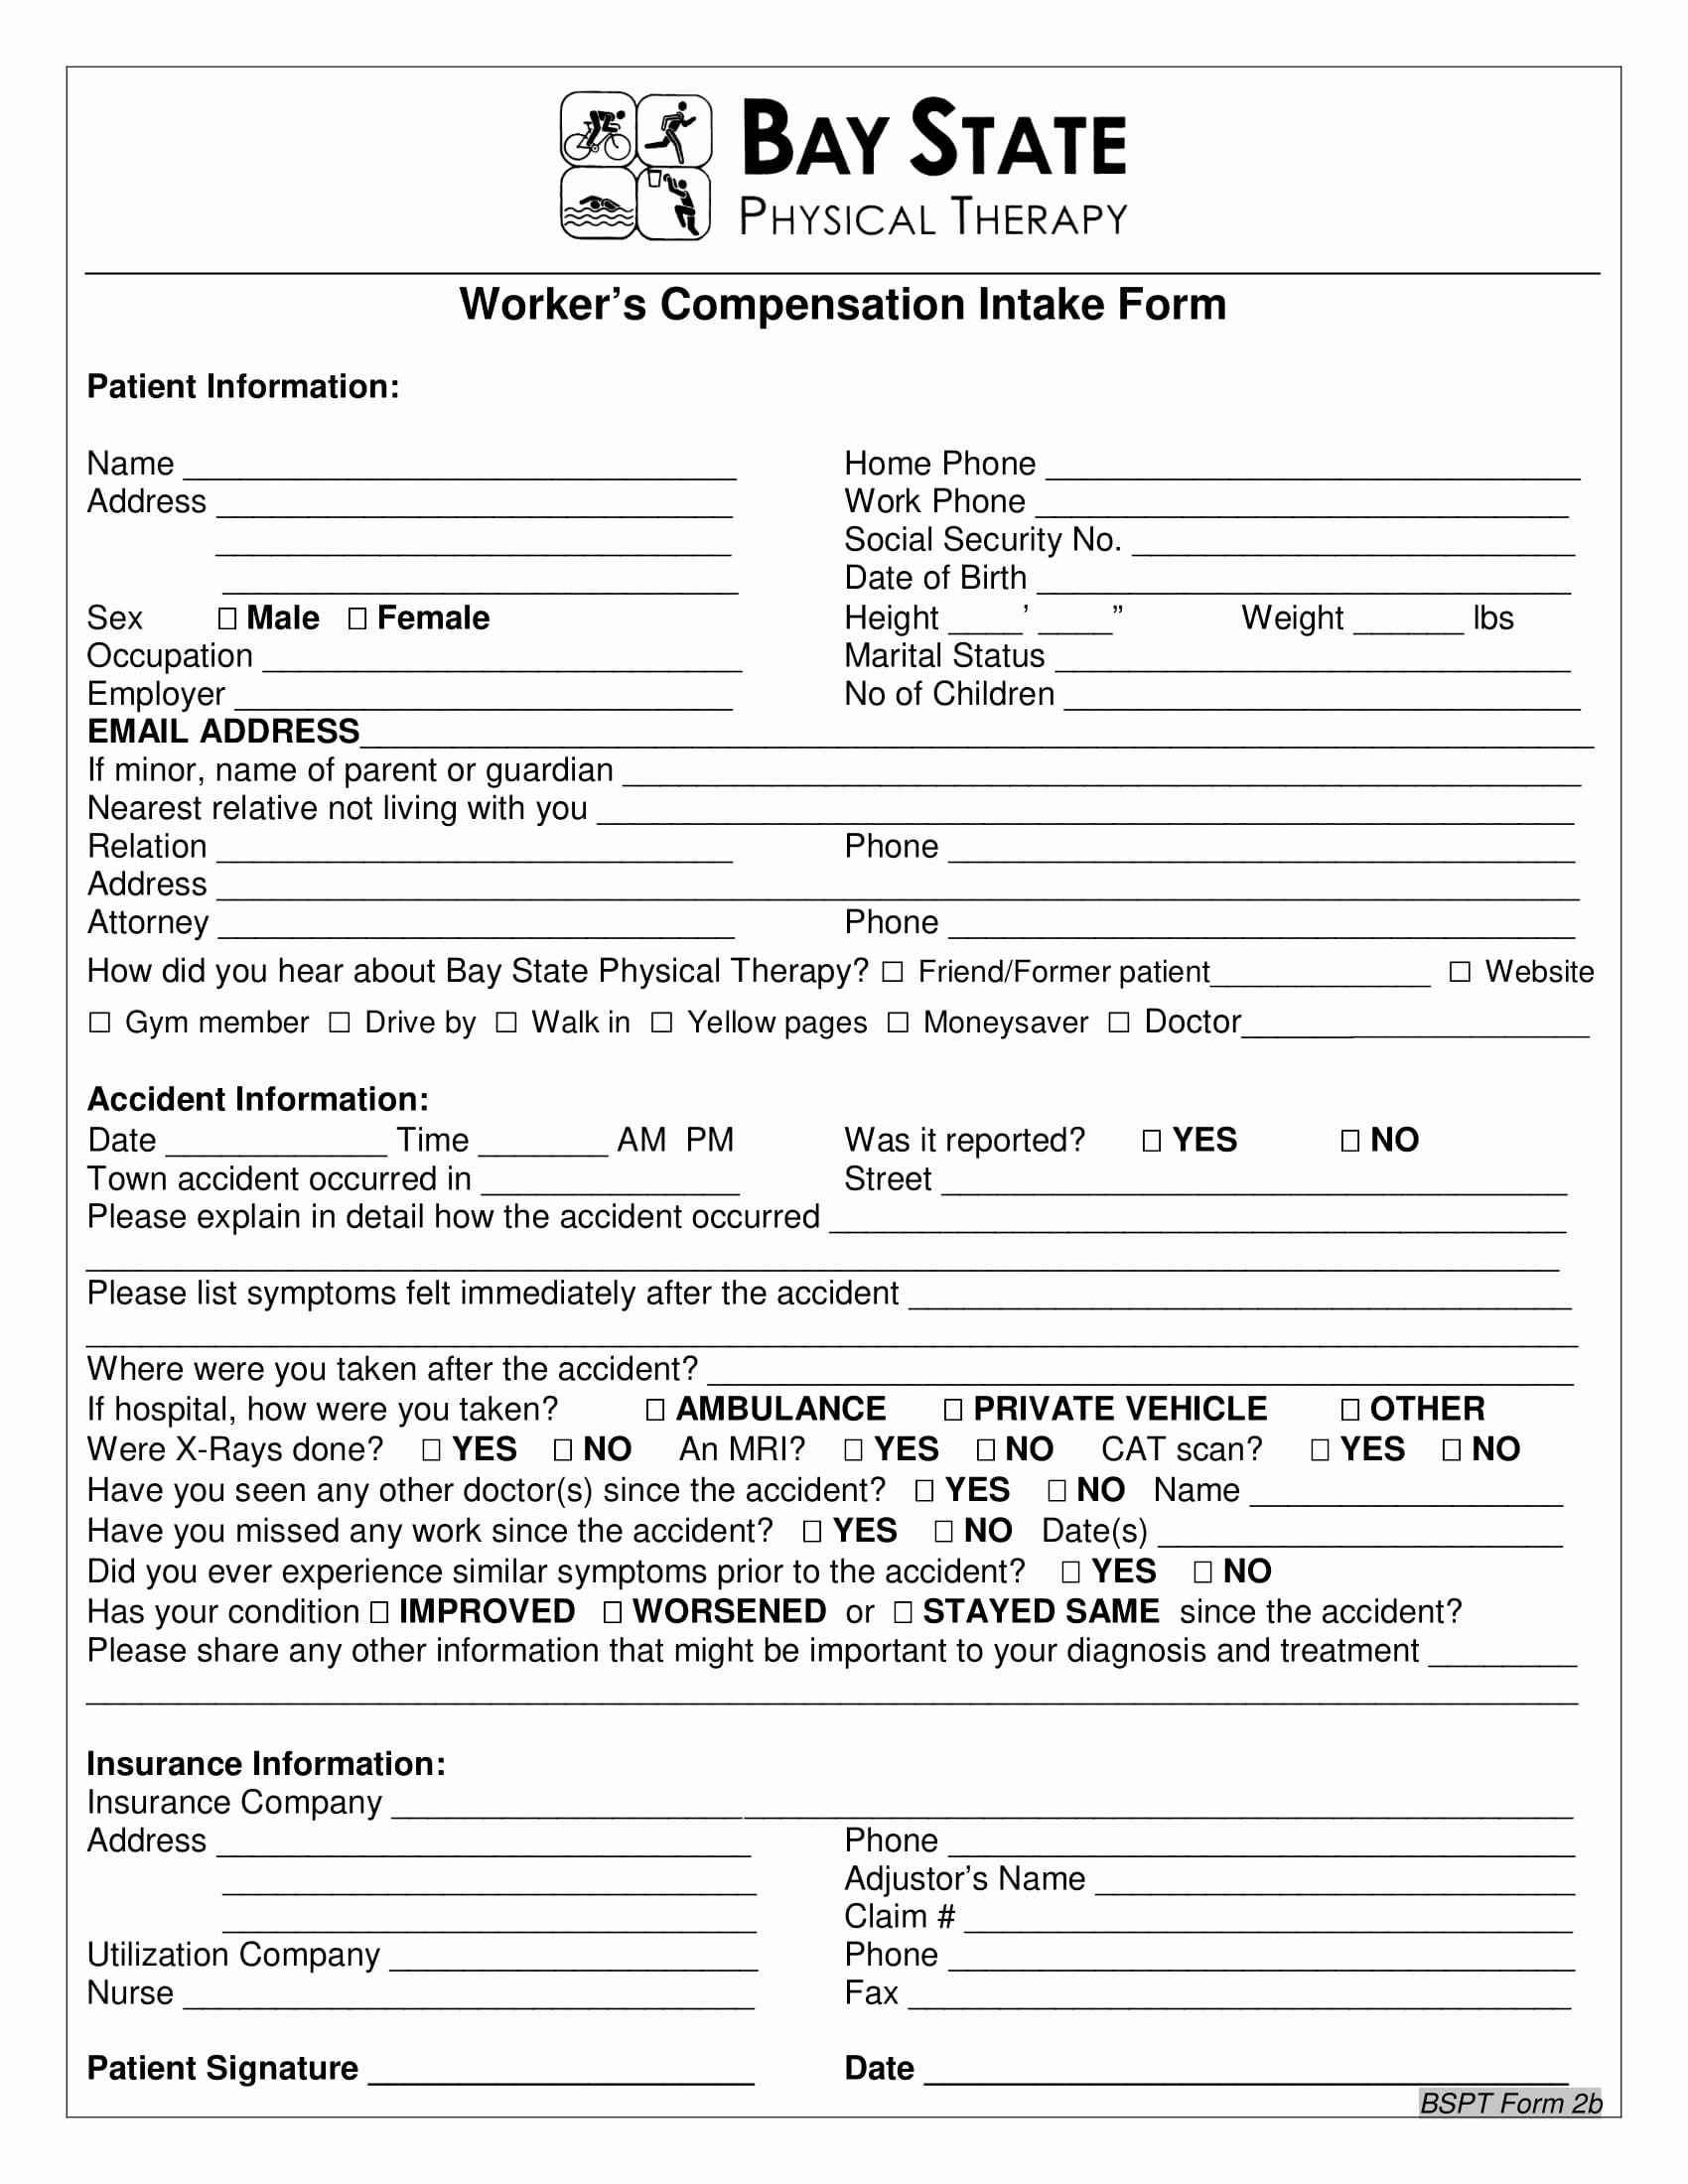 Patient Intake form Pdf Fresh Free 5 Physical therapy Intake forms In Pdf